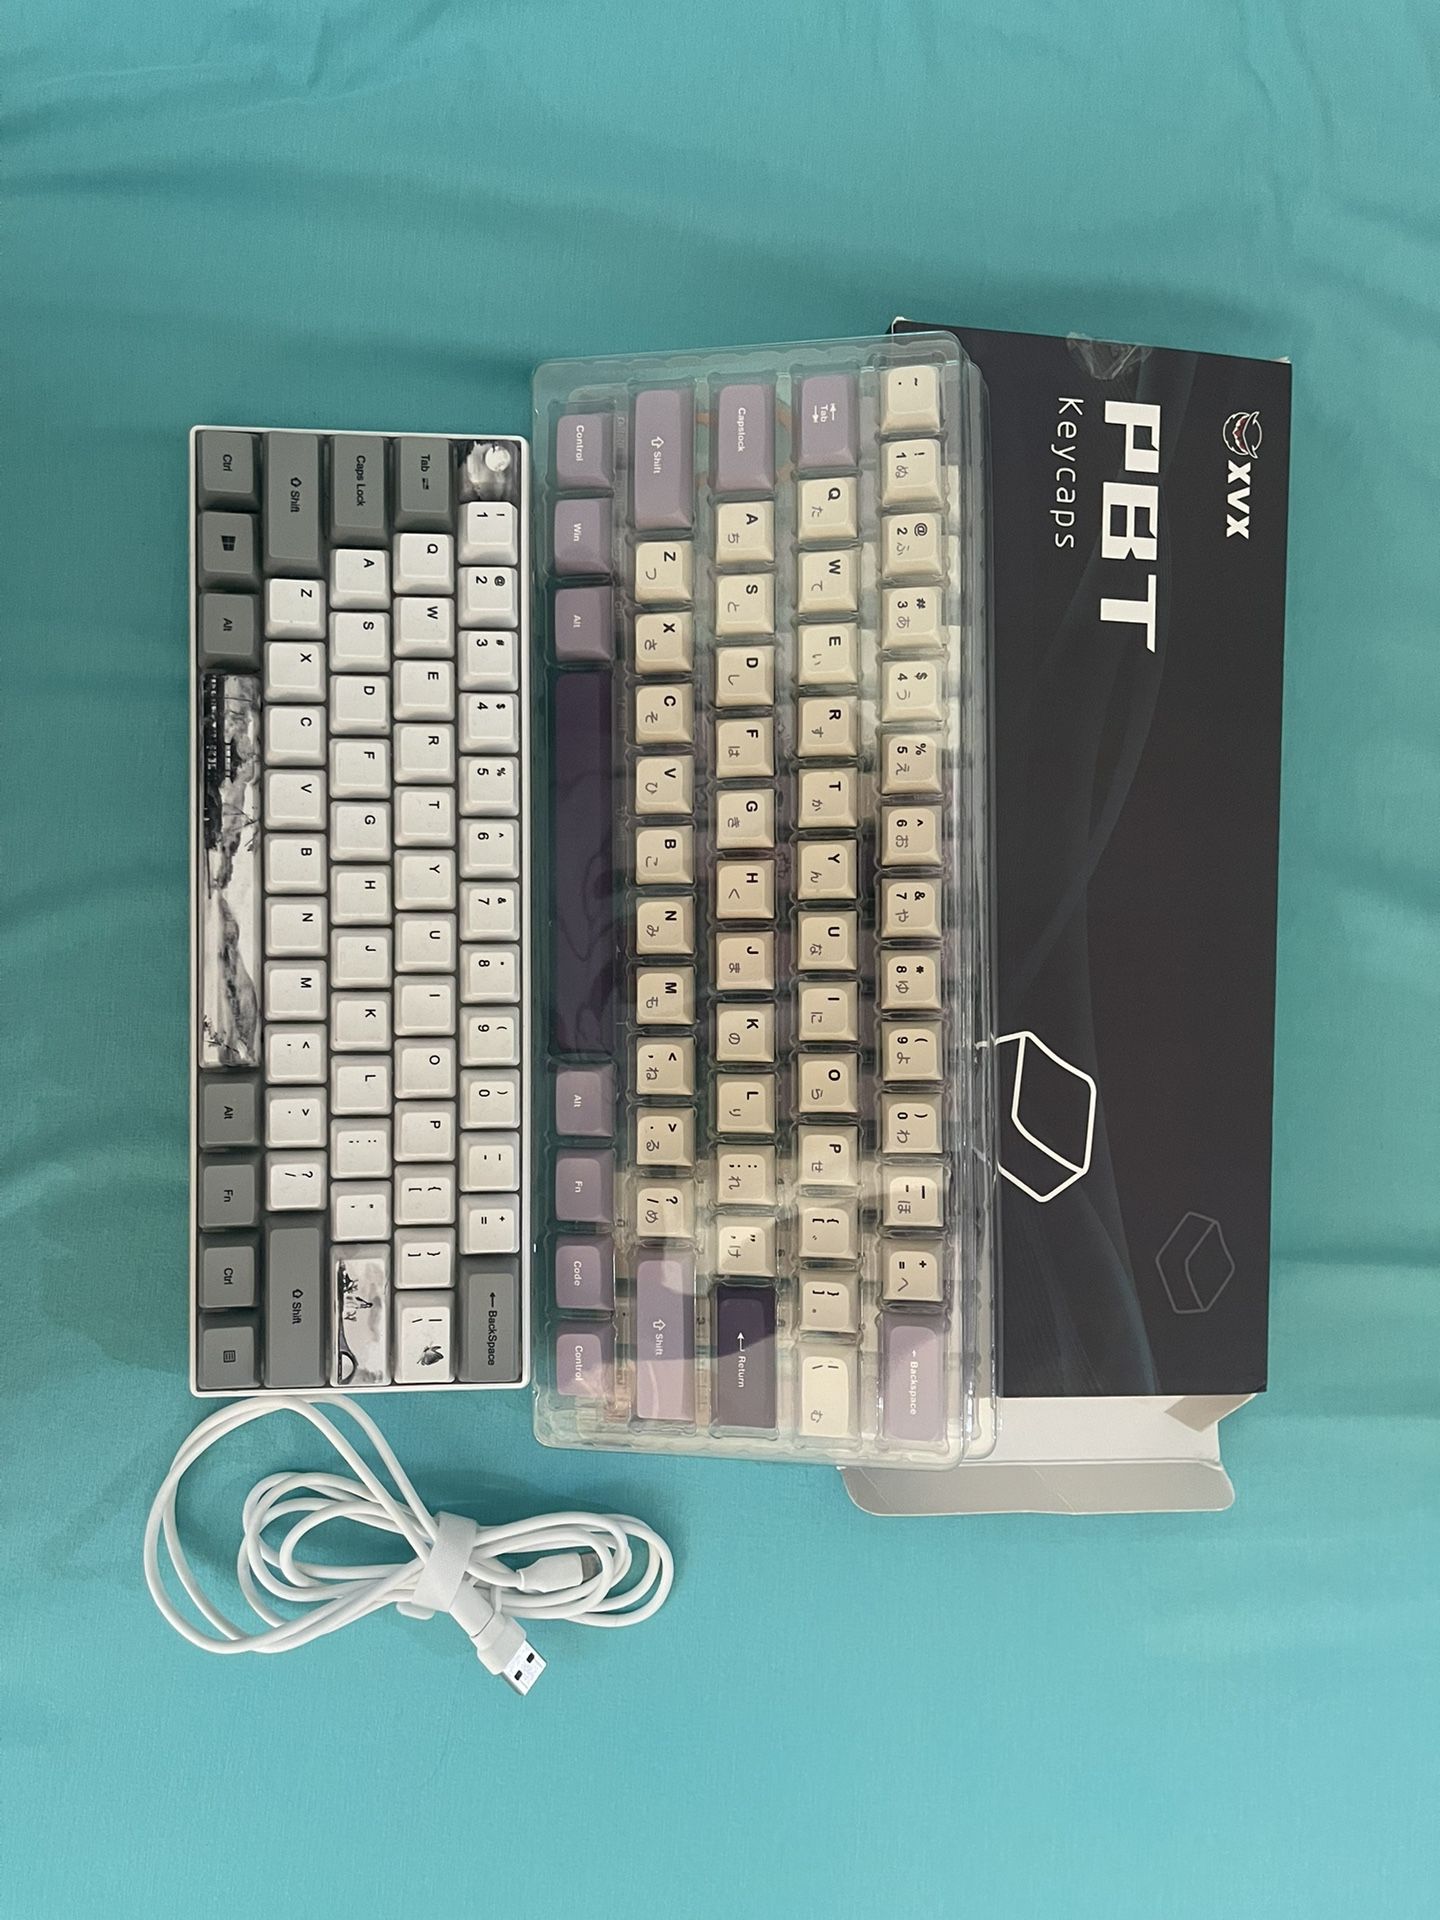 Royal Kludge Keyboard w/ cord and purple keycap set